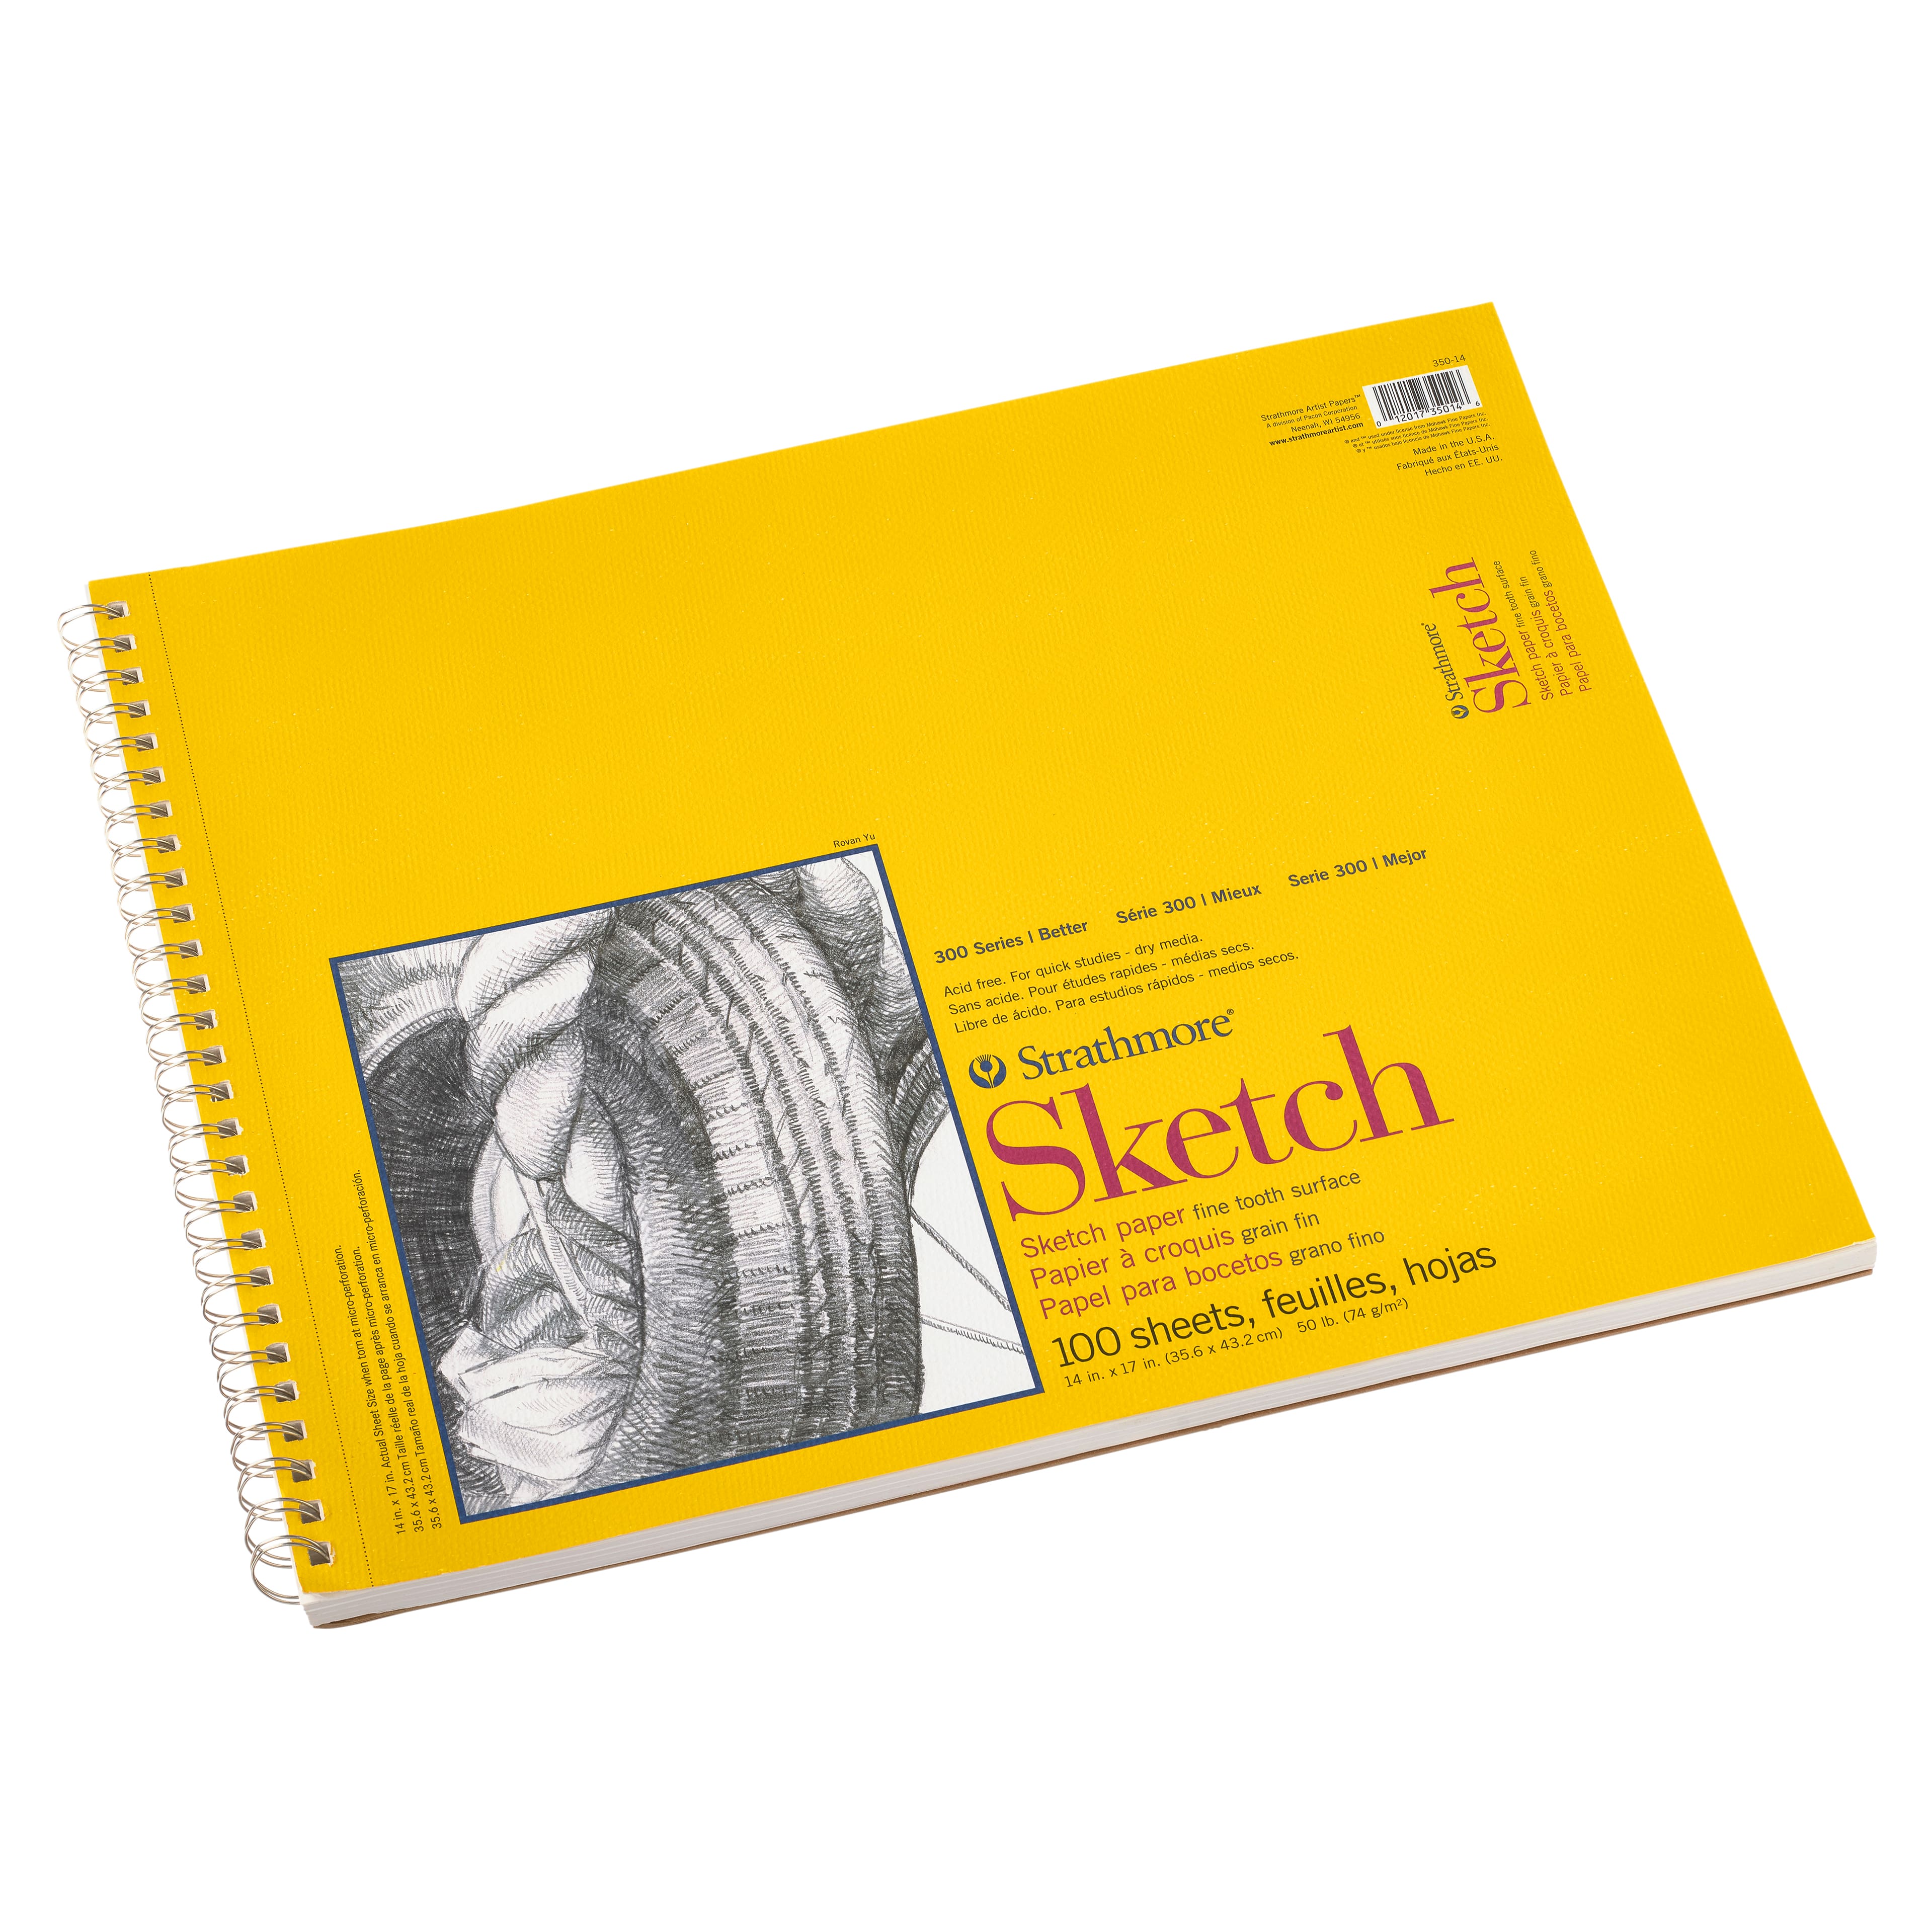  Strathmore 300 Series Sketch Pad, 18x24 inch, 30 Sheets, Side  Wire - Artist Sketchbook for Drawing, Illustration, Art Class Students :  Arts, Crafts & Sewing